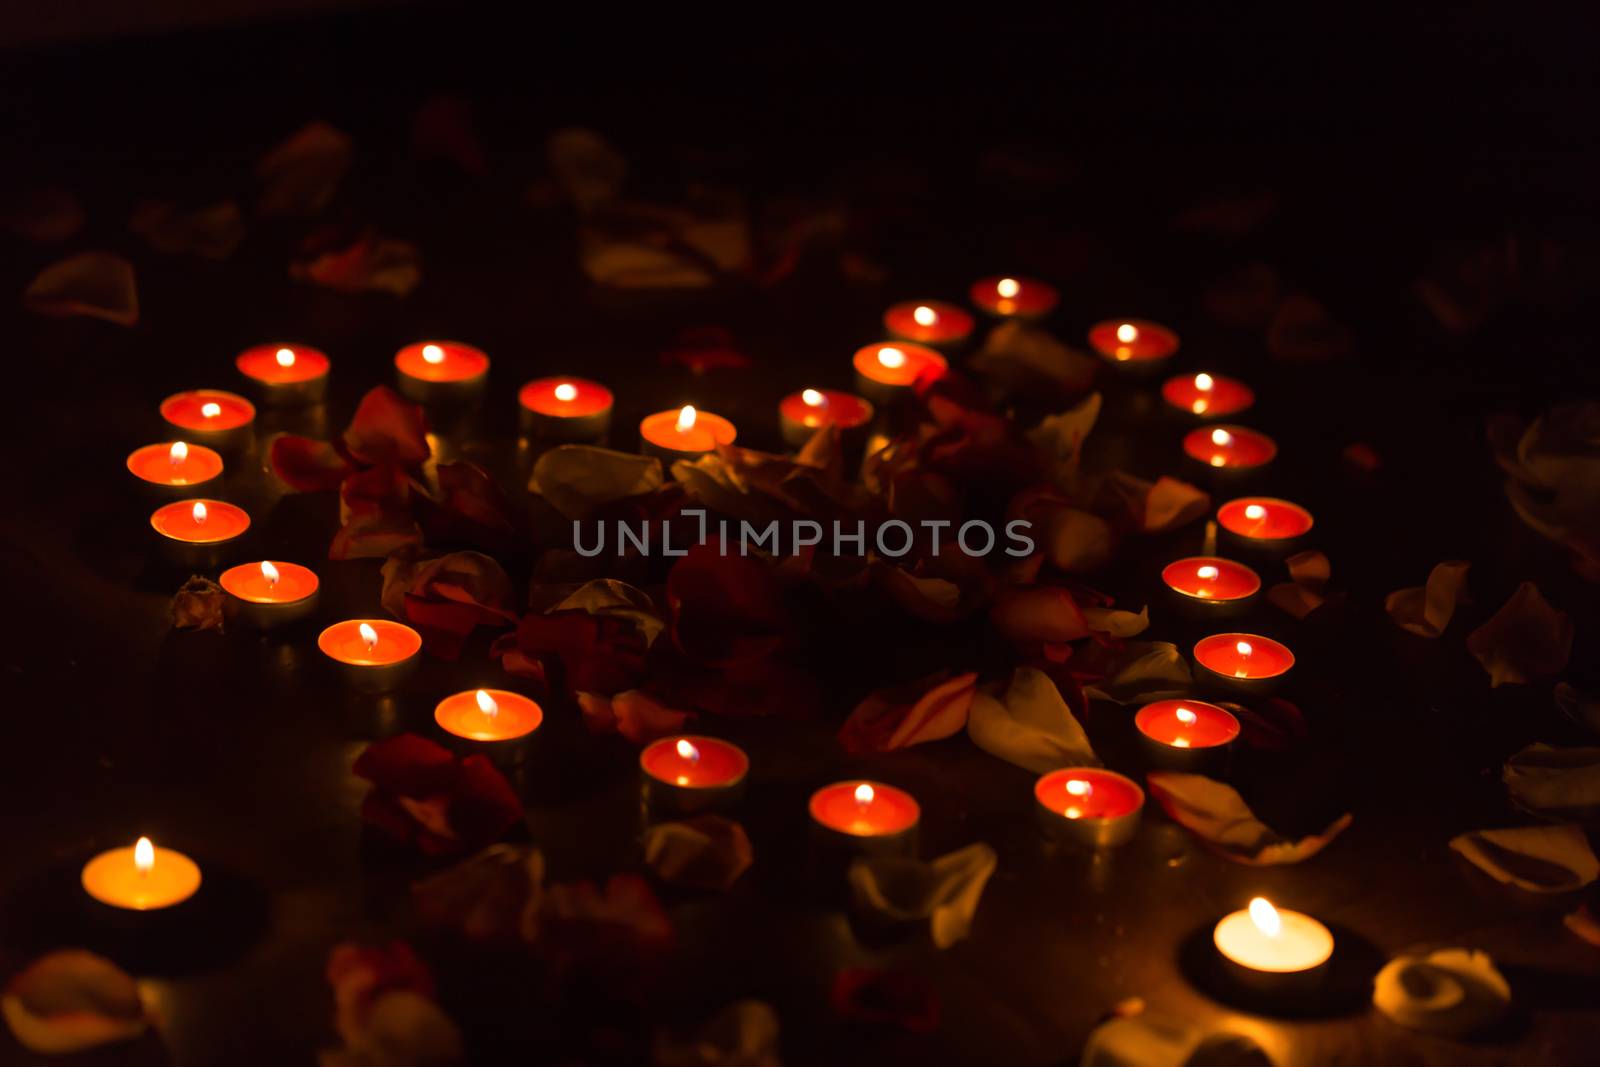 rose petals. romantic evening. candles. heart from candles and rose petals